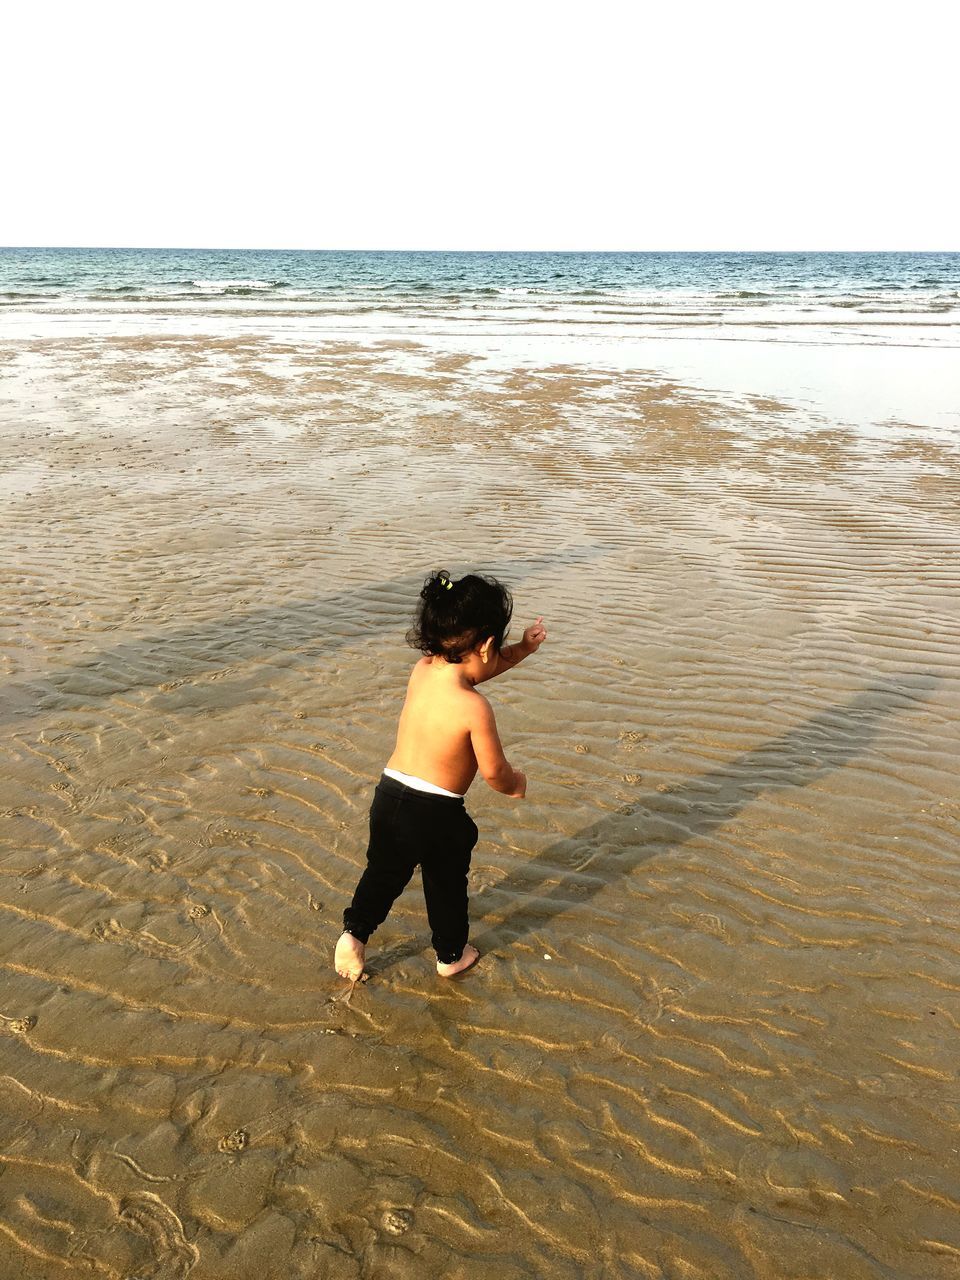 childhood, horizon over water, full length, sea, water, beach, elementary age, casual clothing, clear sky, girls, playing, leisure activity, vacations, sand, innocence, looking down, lifestyles, boys, playful, scenics, tranquil scene, summer, shore, travel destinations, nature, enjoyment, holiday - event